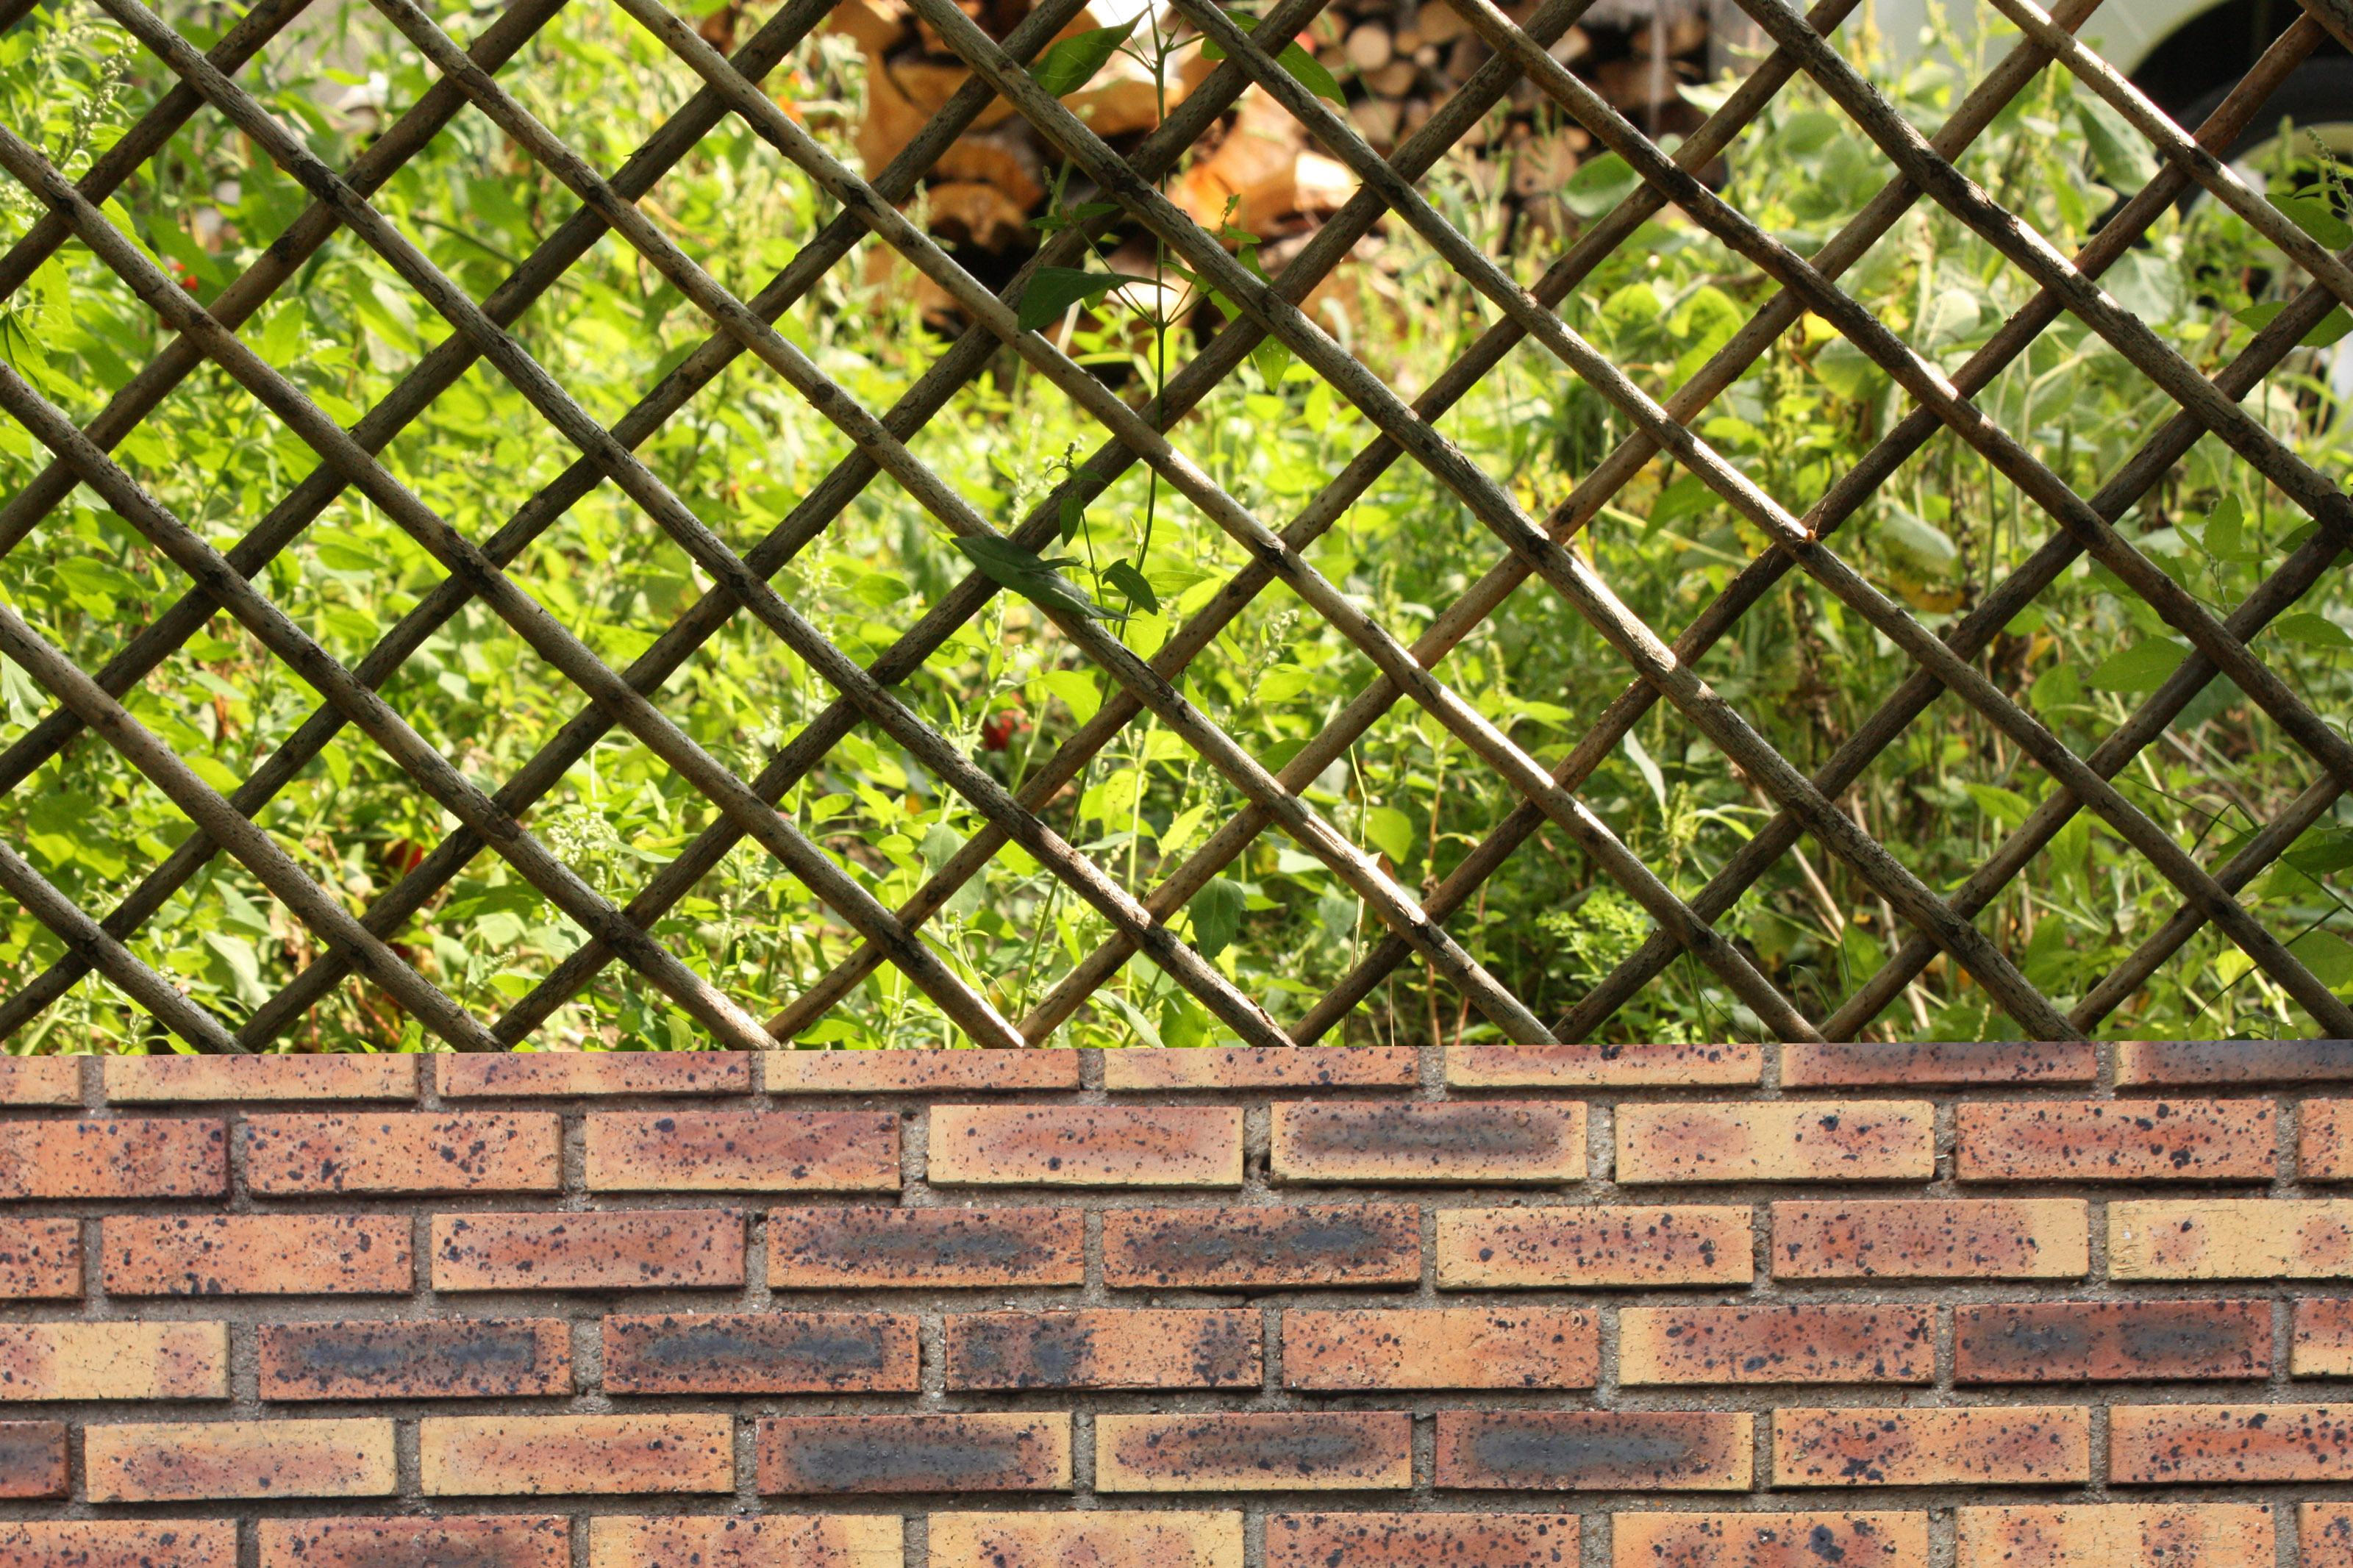 Fence consisting of a low brick wall and a trellis of wooden braces Enclosed garden